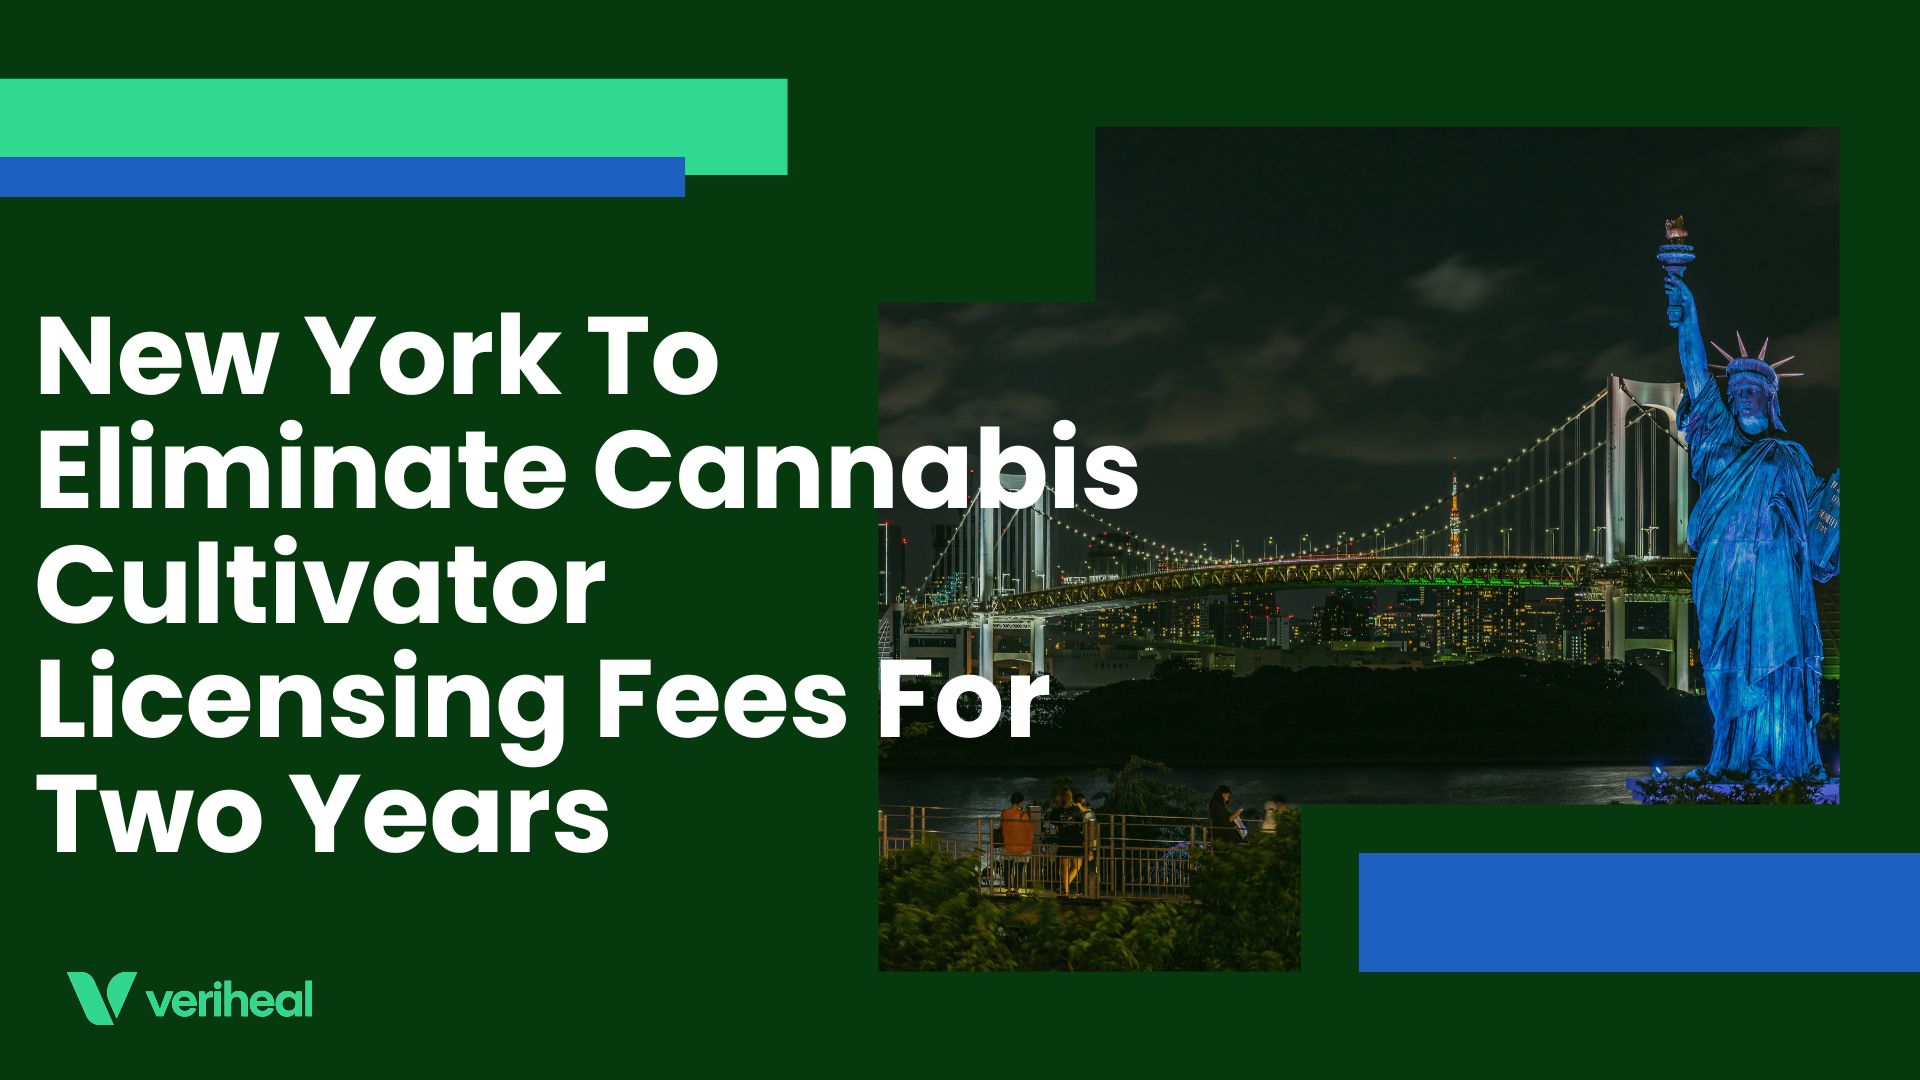 New York To Eliminate Cannabis Cultivator Licensing Fees For Two Years